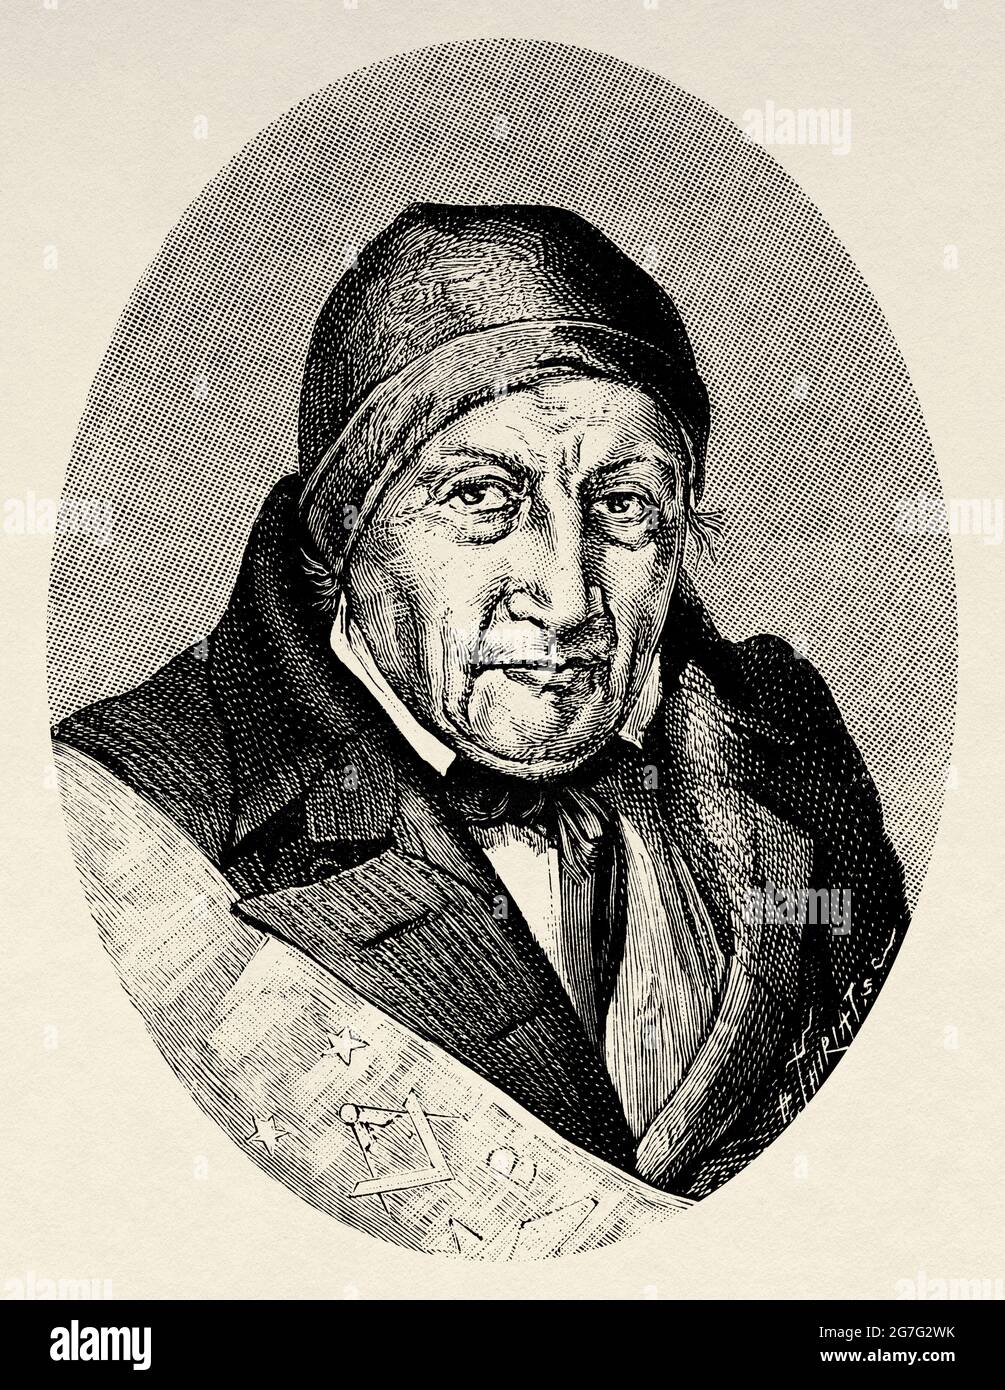 Noel Des Quersonnieres, French official during the Revolution, subsequently exiled himself to London where he presumably died, France, Europe. Old 19th century engraved illustration from La Nature 1888 Stock Photo